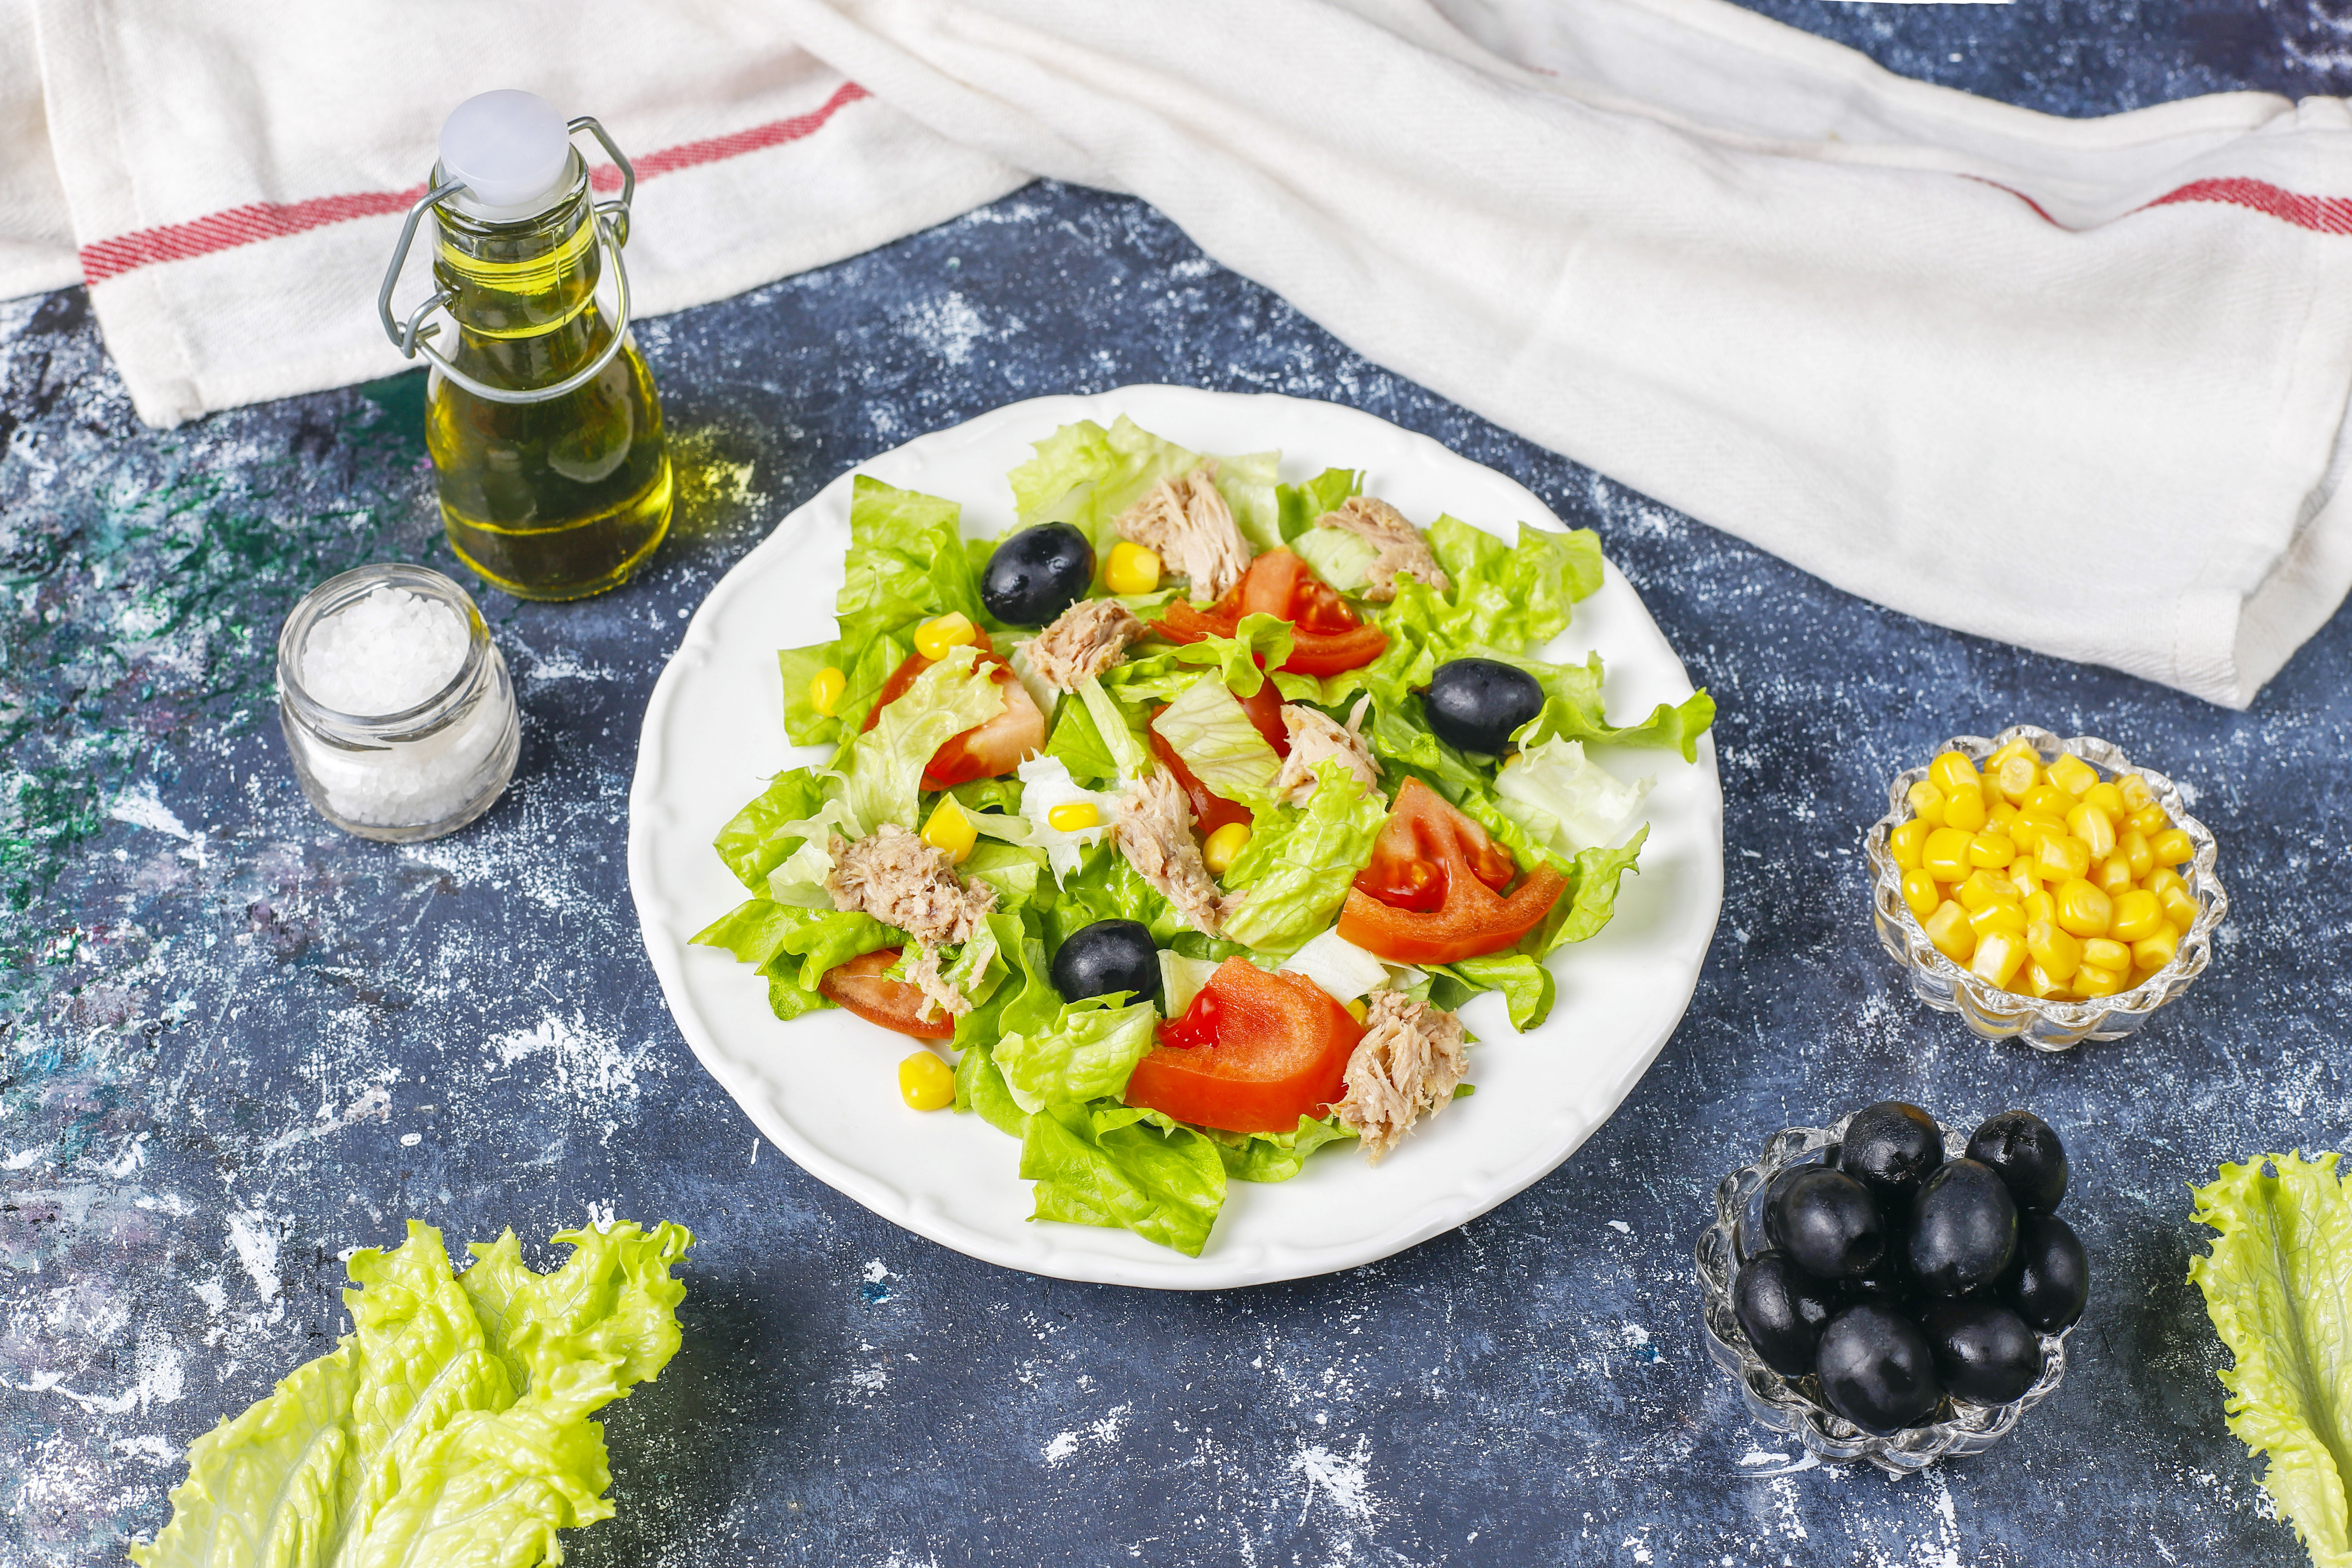 Salad with Olive oil